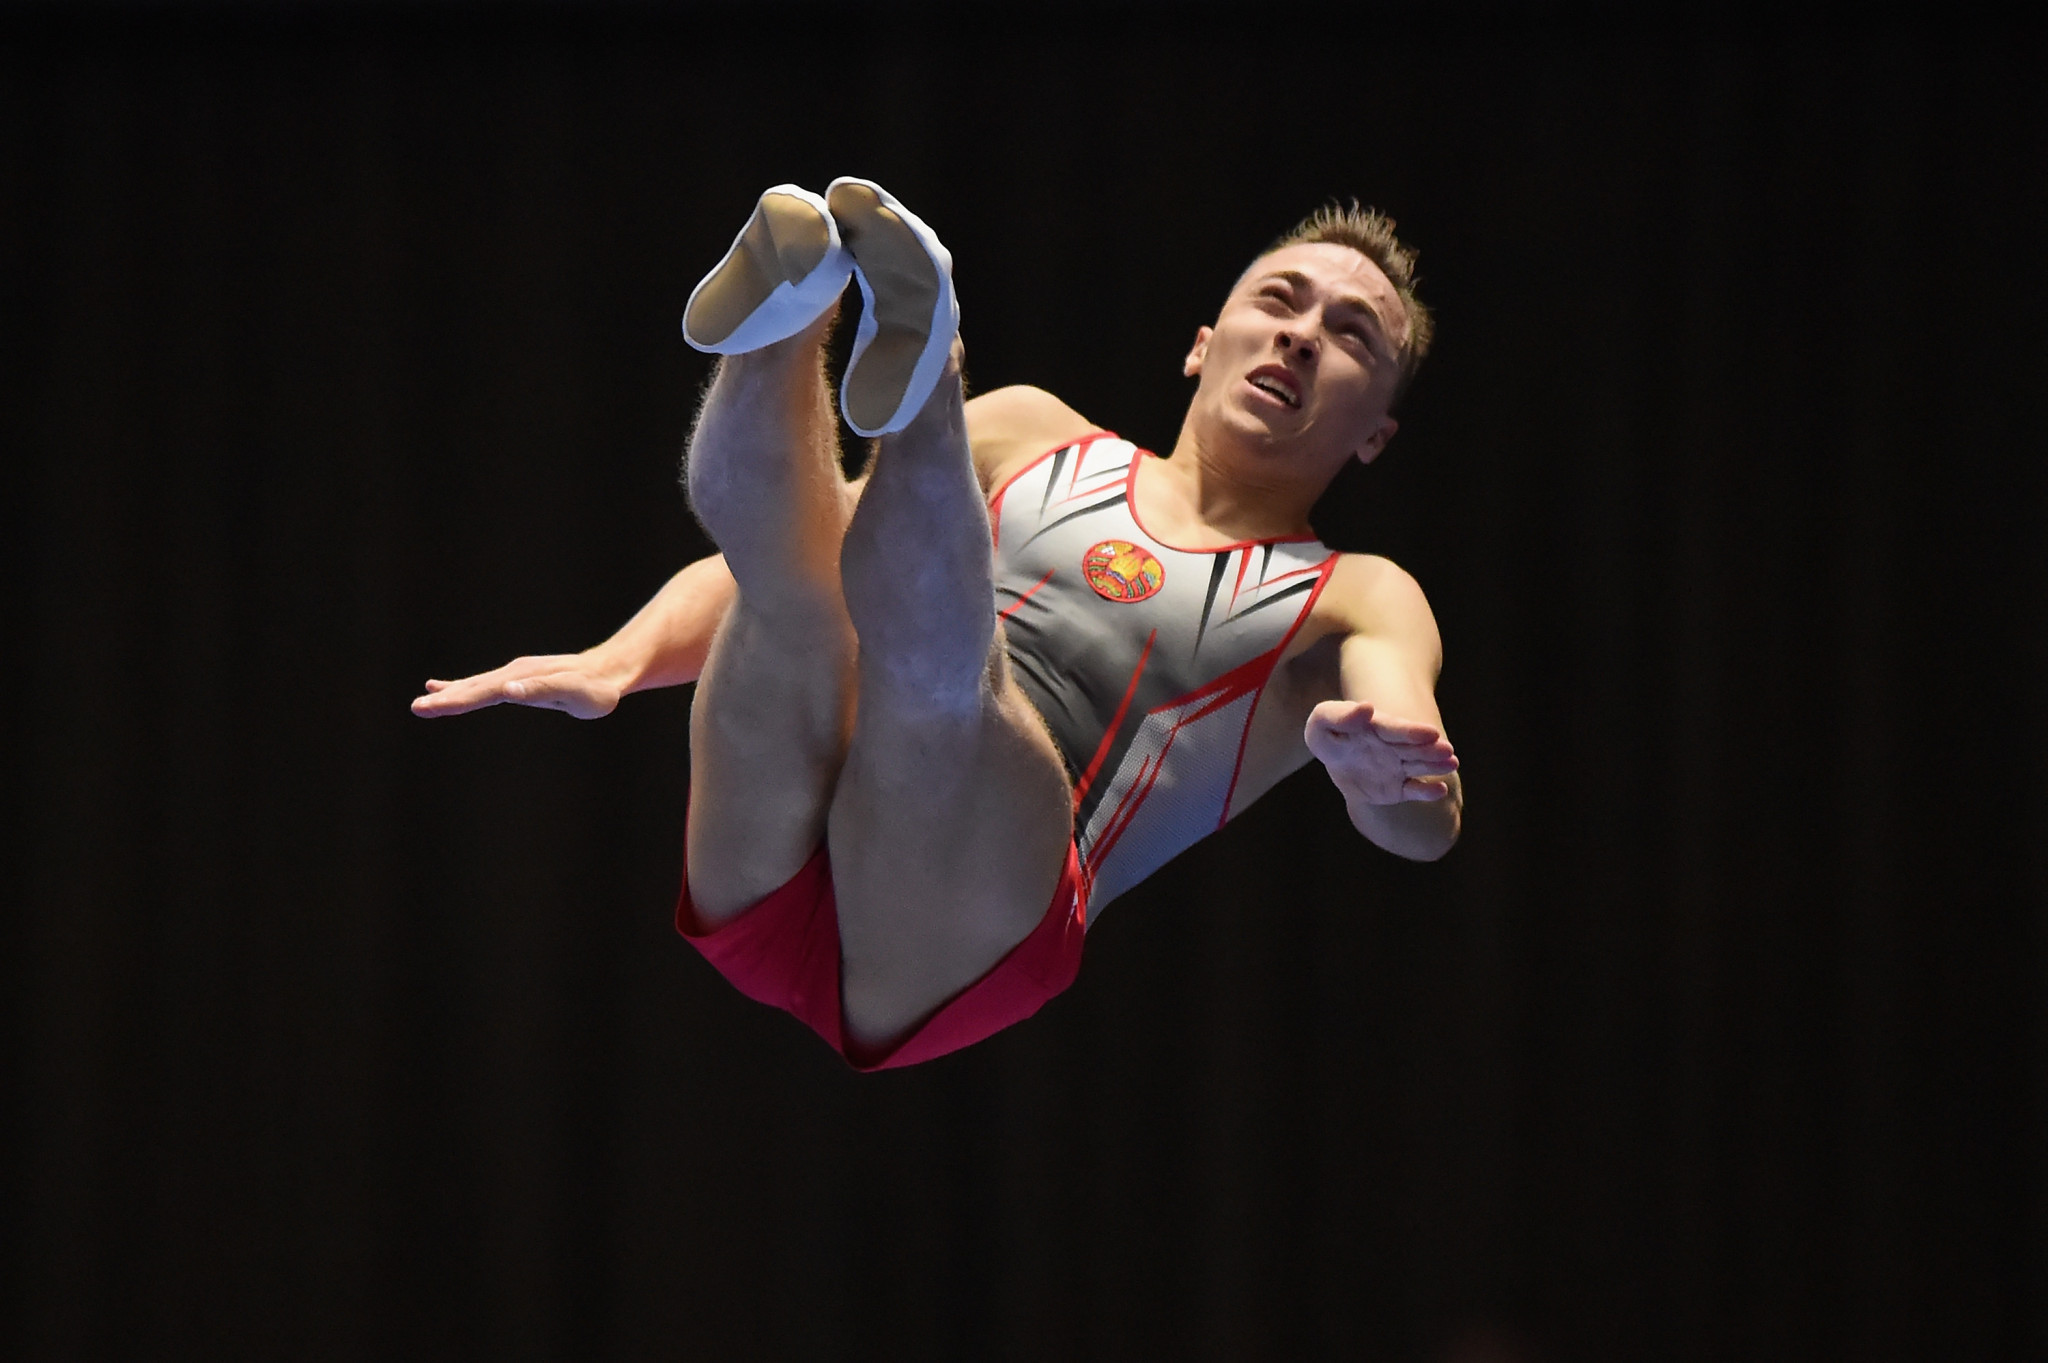 Olympic champion Uladzislau Hancharou topped men's qualifying in the individual trampoline event at the FIG Trampoline World Cup ©Getty Images